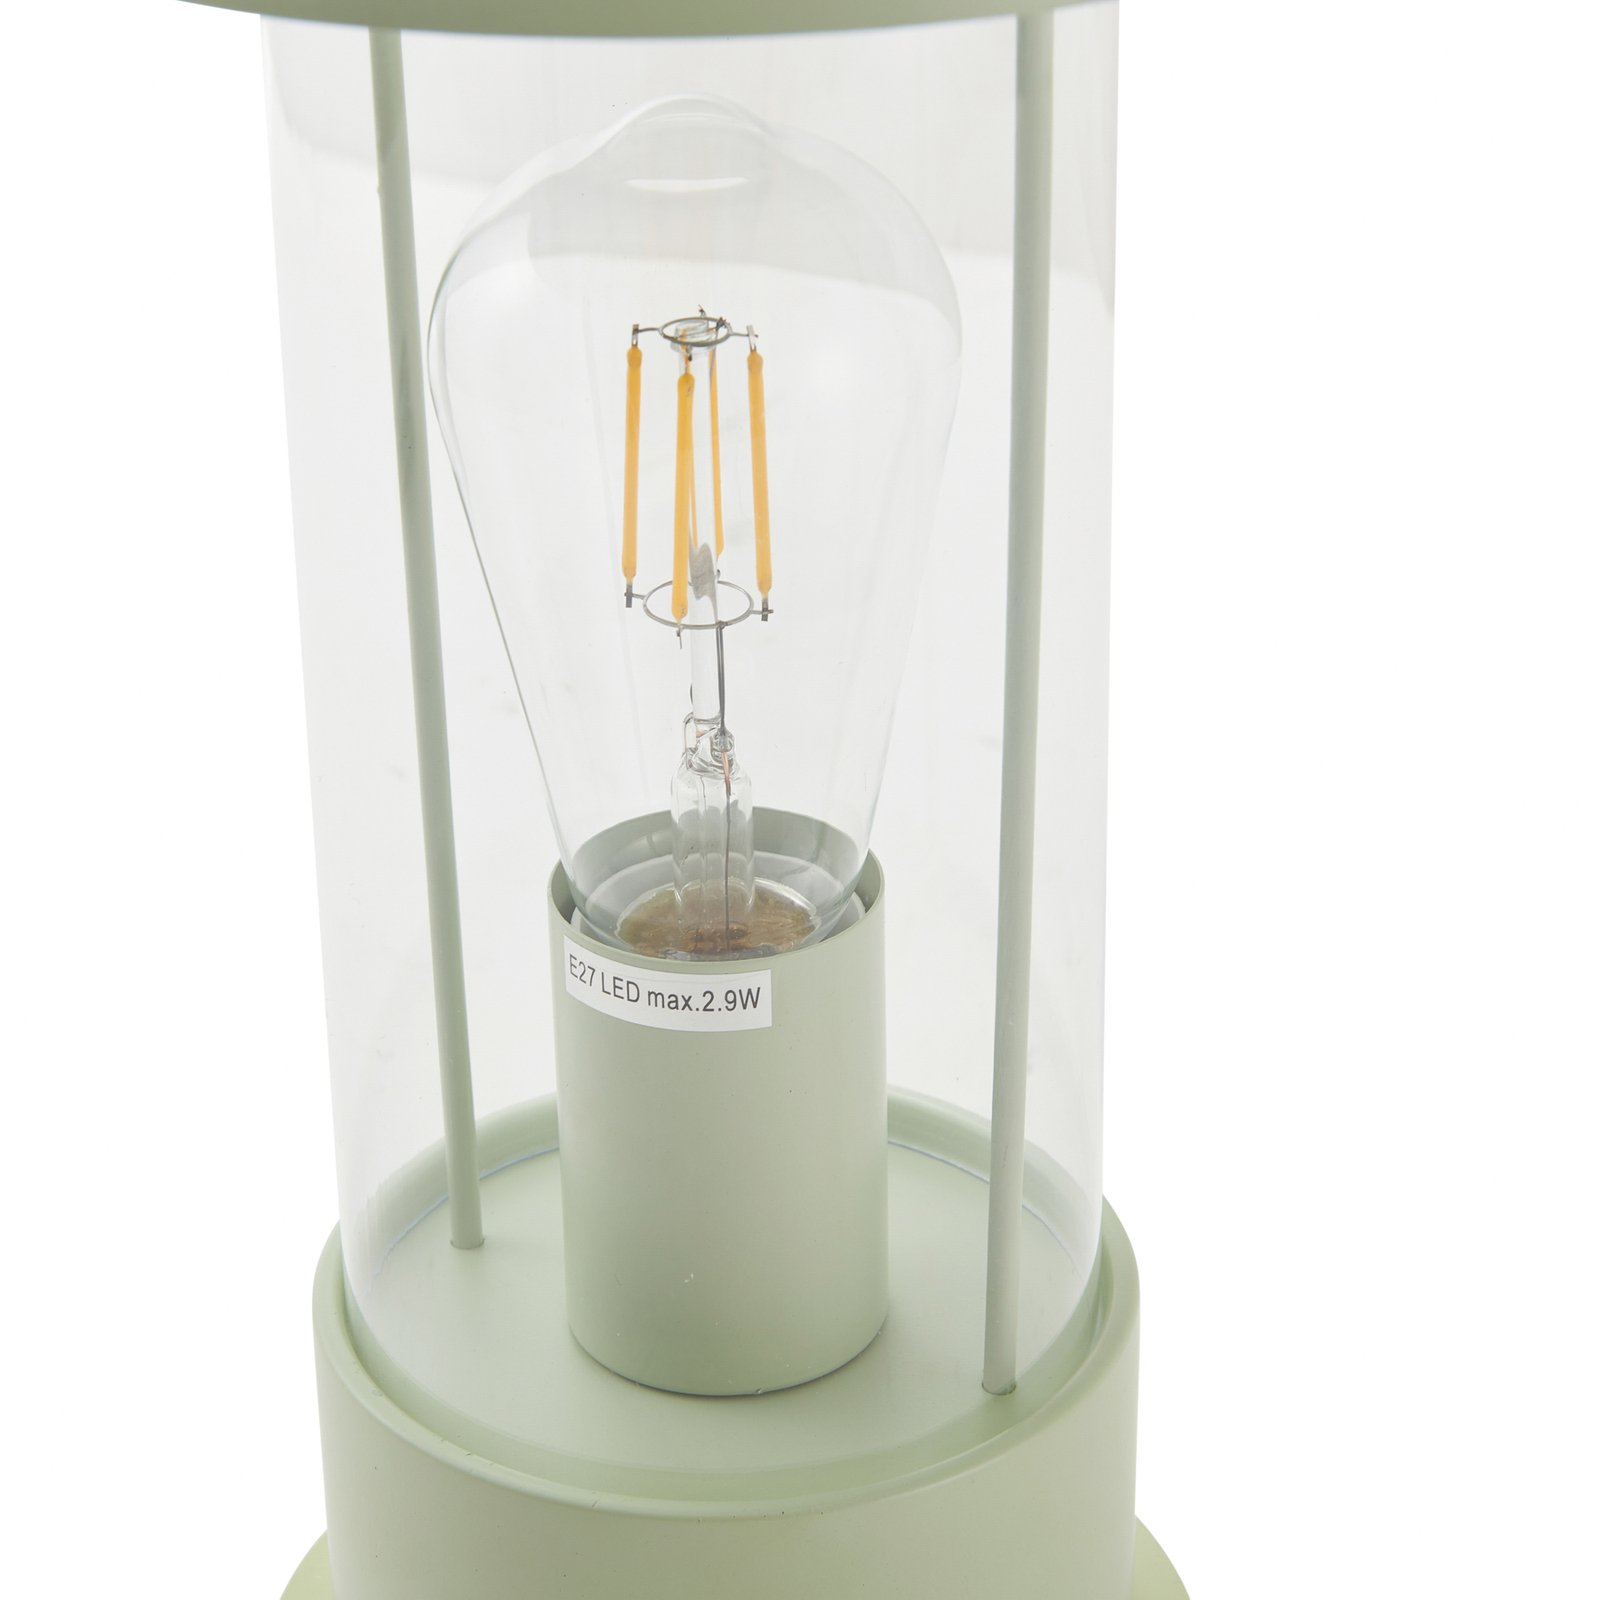 Lindby rechargeable table lamp Yvette, green, IP44, touch dimmer